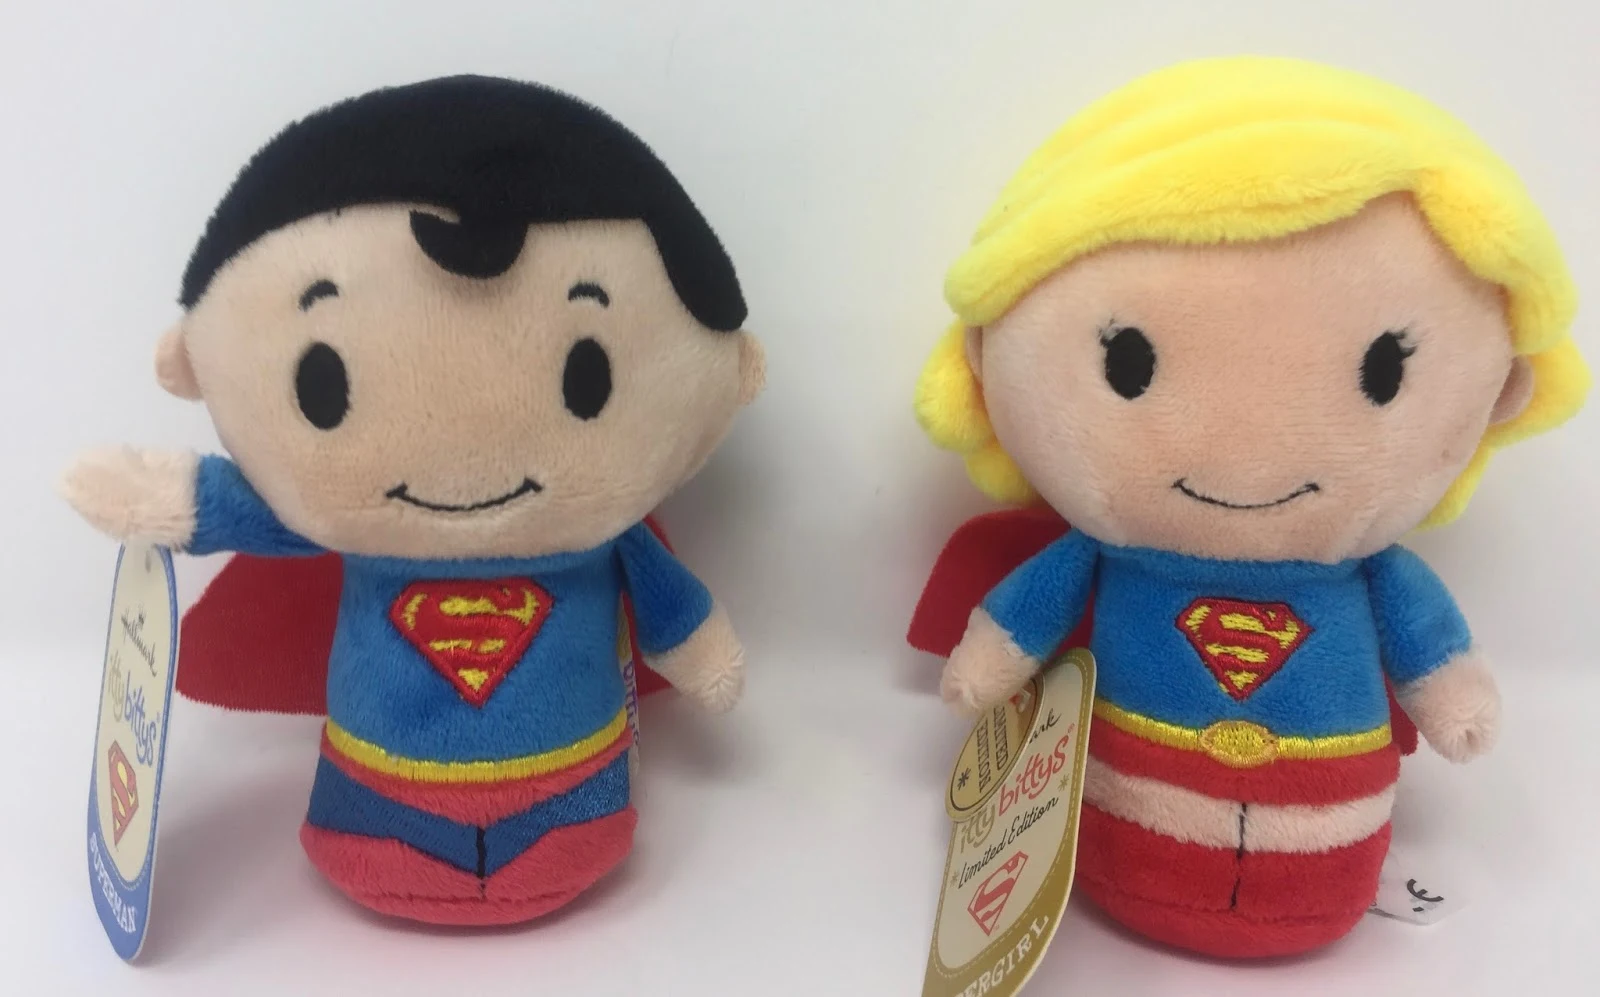 Small plush figures looking like super man and super girl